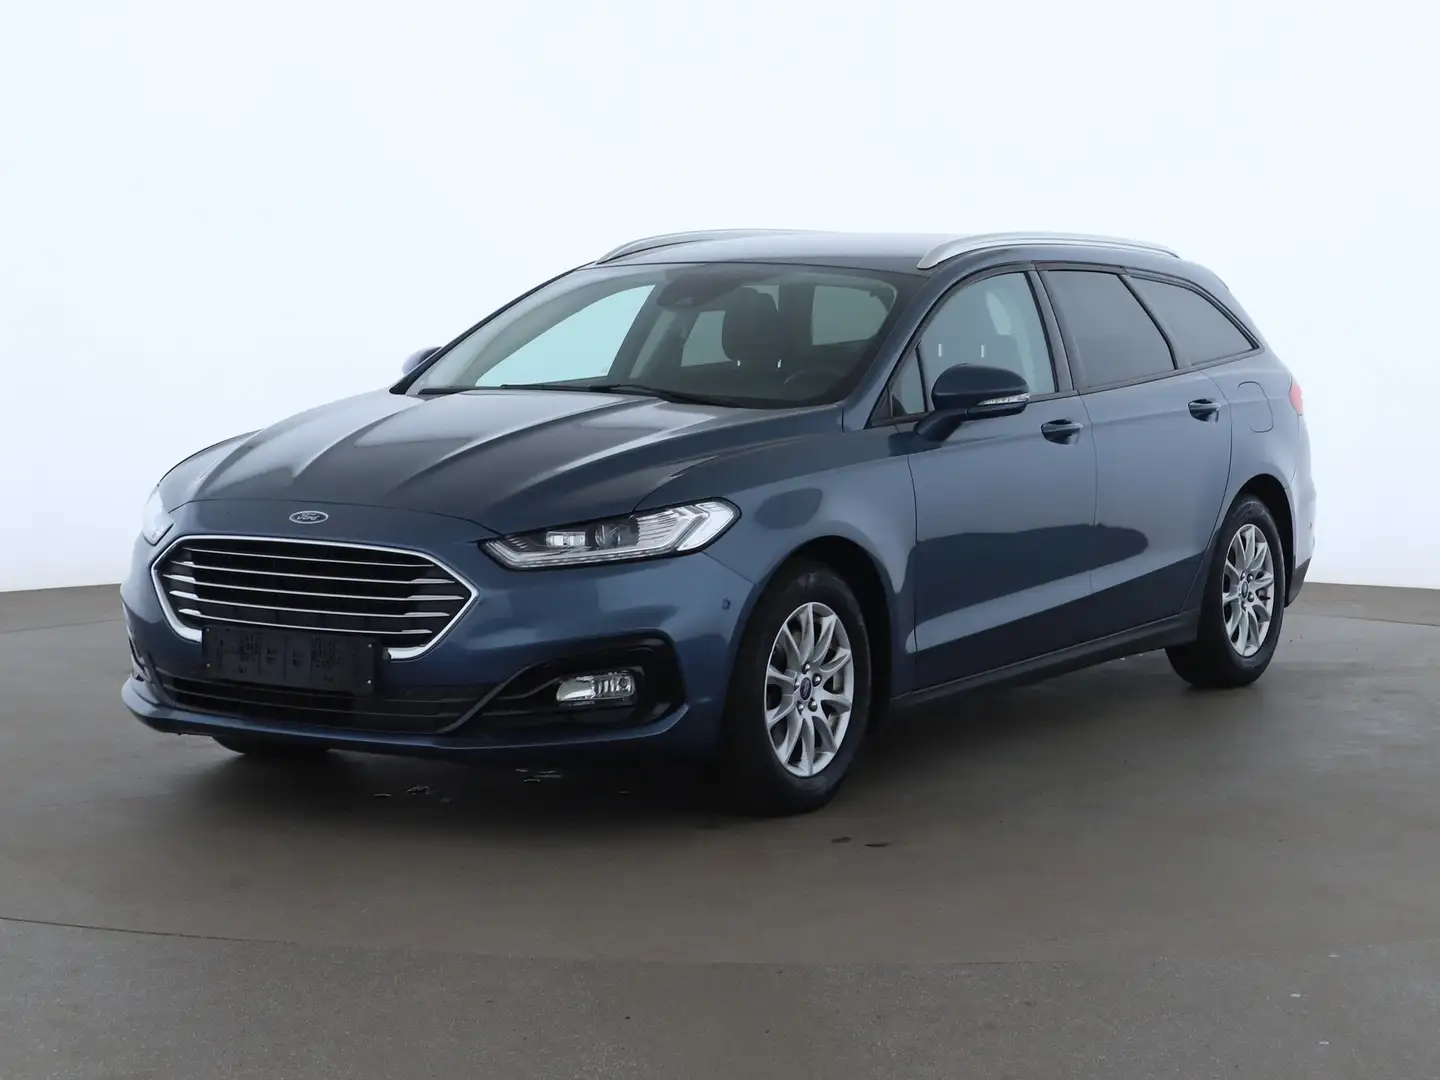 Ford Mondeo Turnier 1.5 Trend Business Edition STANDH. LED. plava - 1